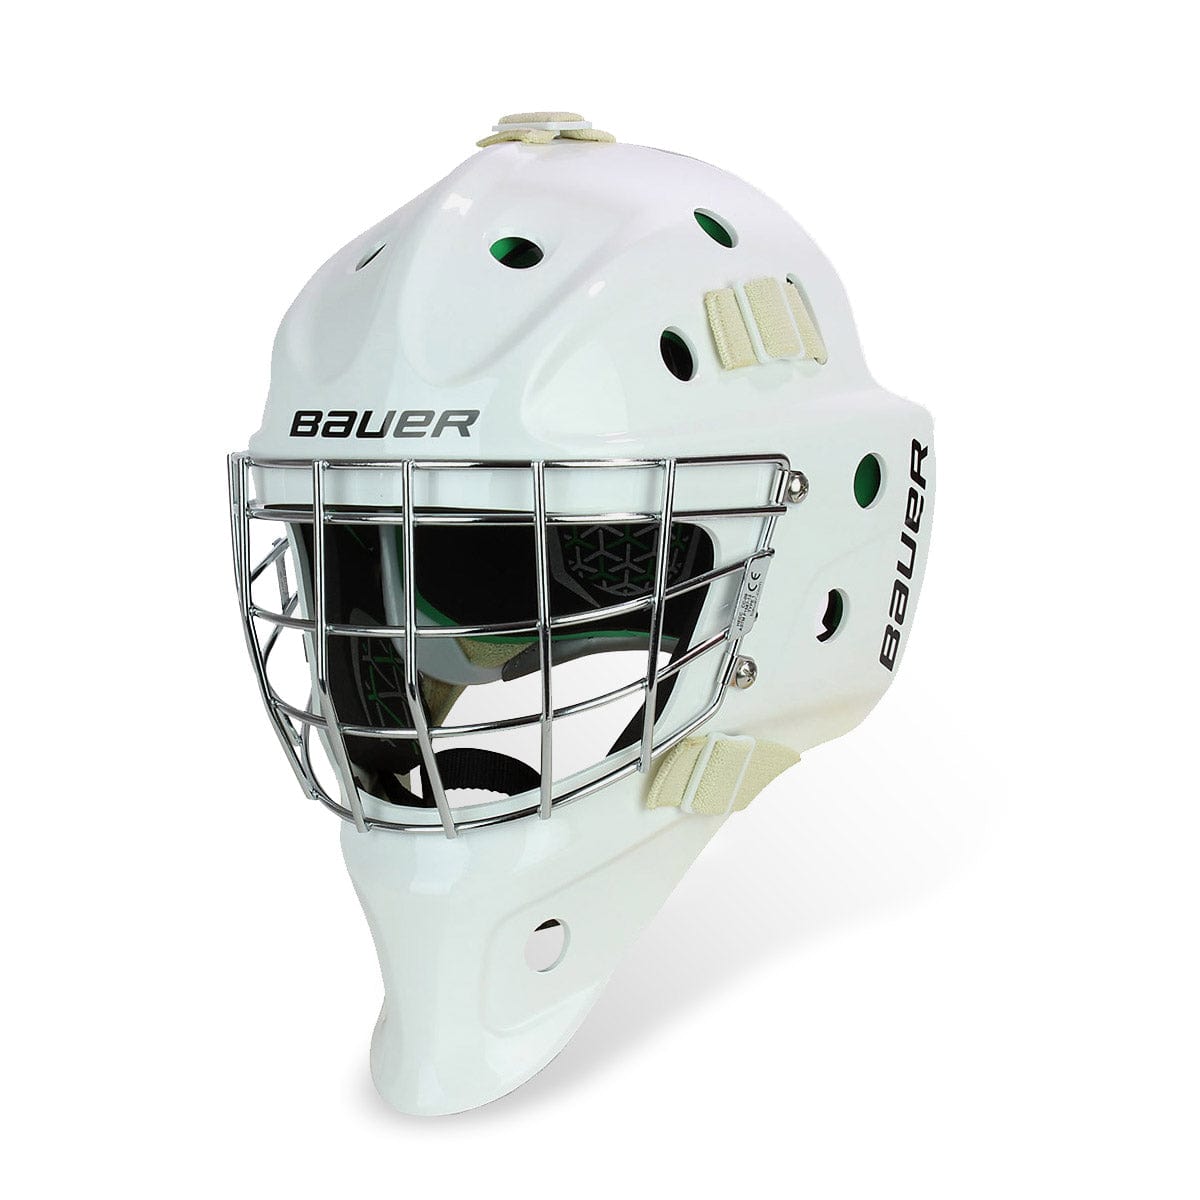 Bauer NME 4 Junior Goalie Mask - White - The Hockey Shop Source For Sports